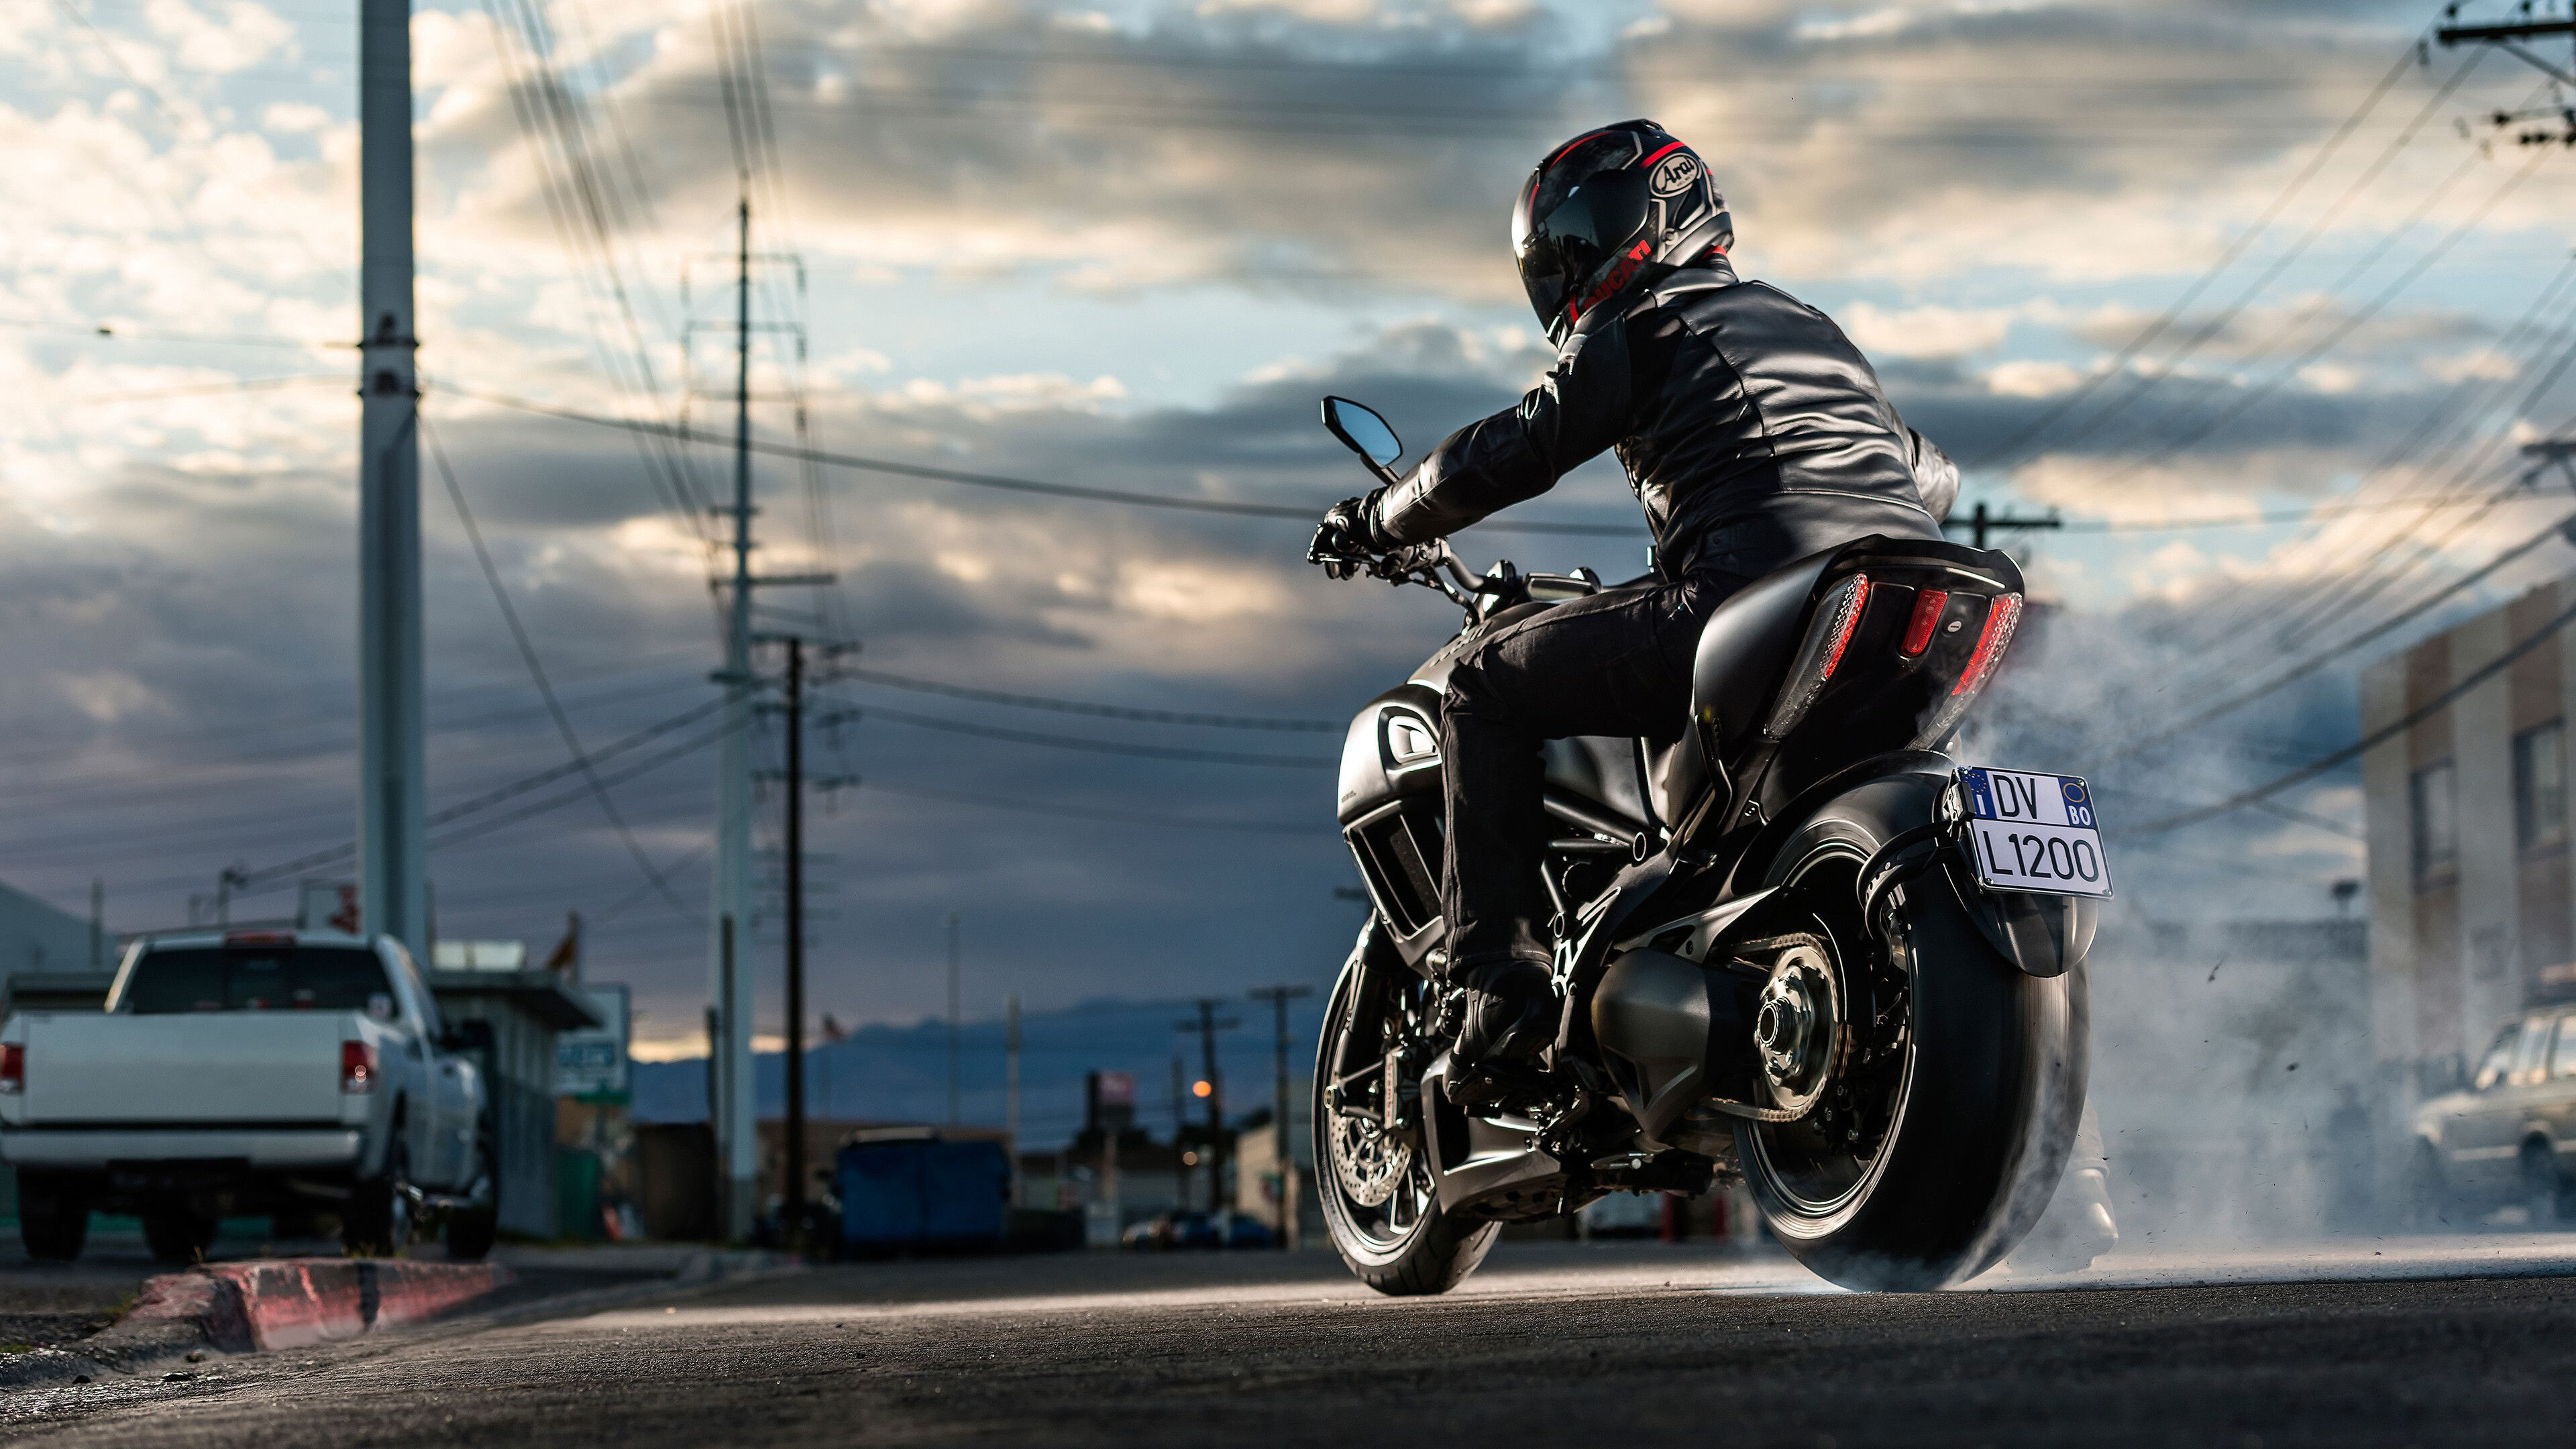 Bike: The Ducati Diavel, The second cruiser motorcycle from Ducati. 3840x2160 4K Background.